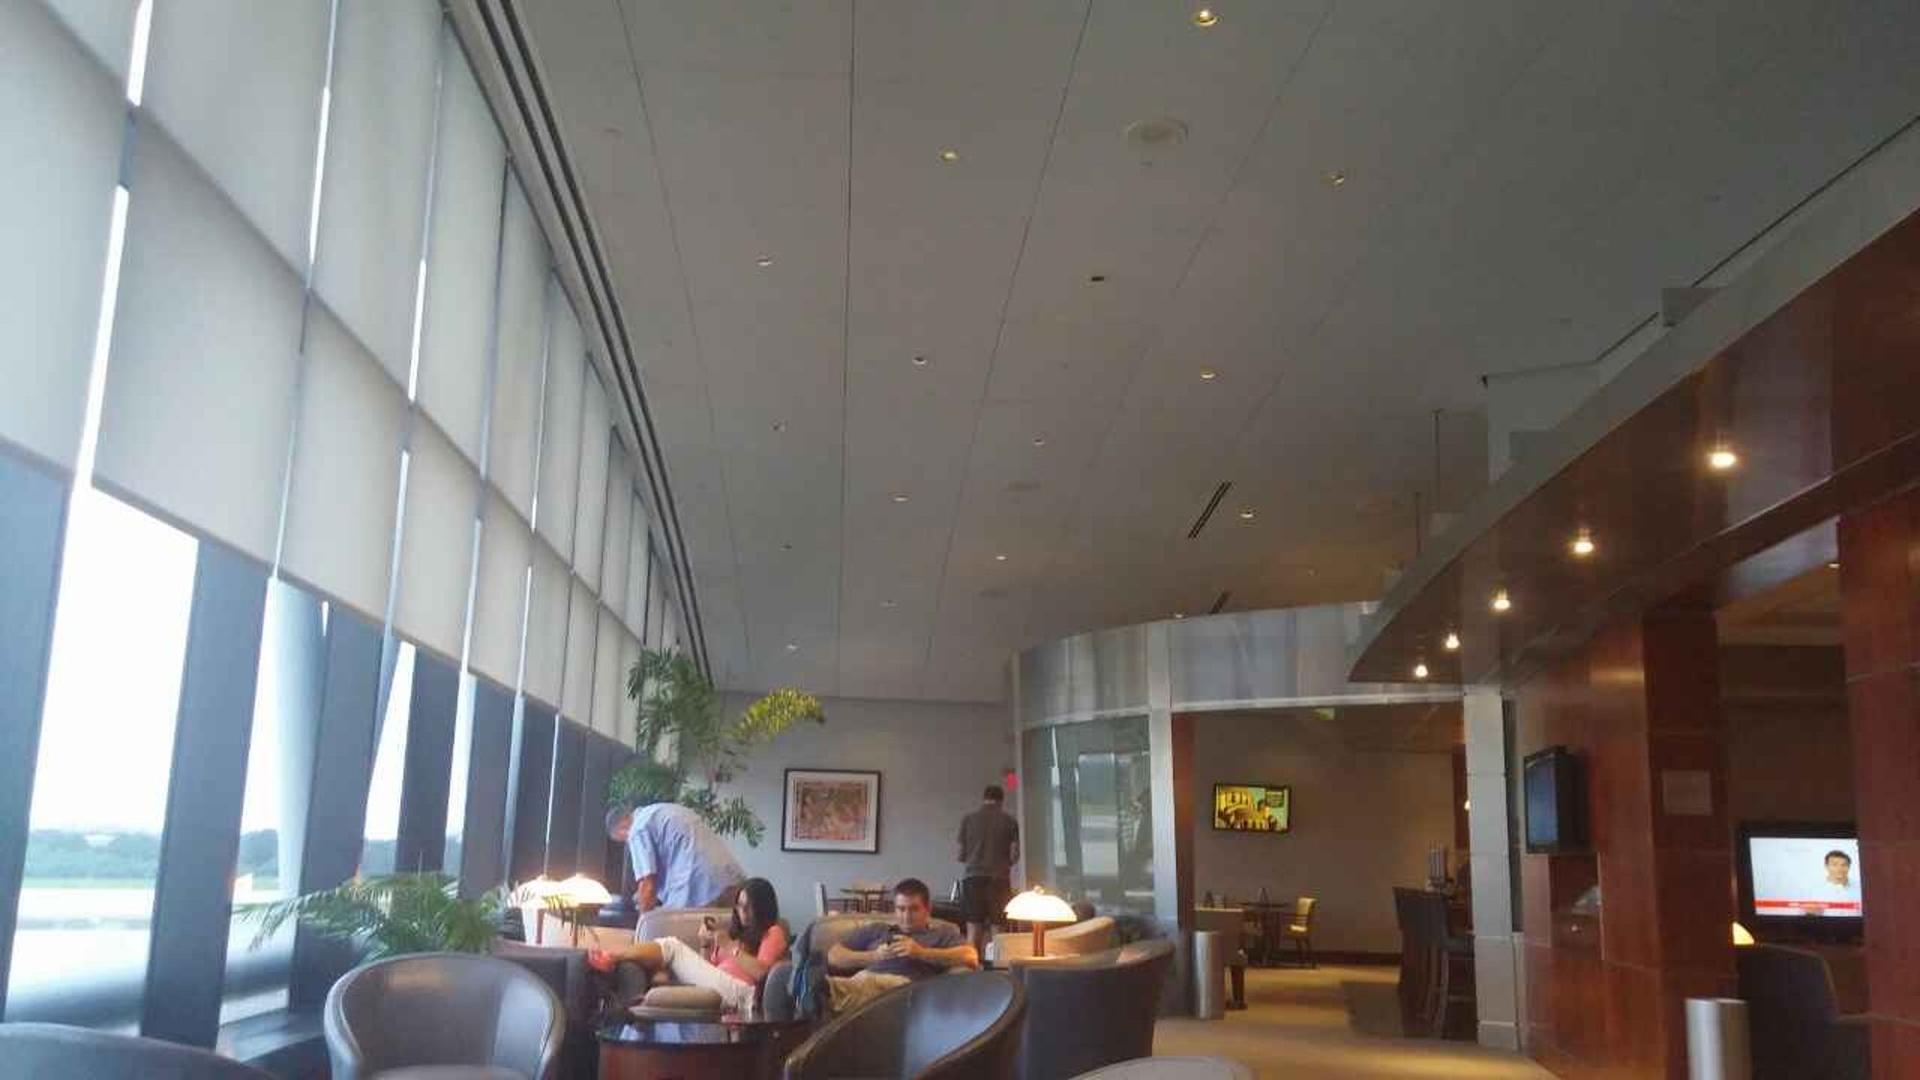 American Airlines Admirals Club image 11 of 20